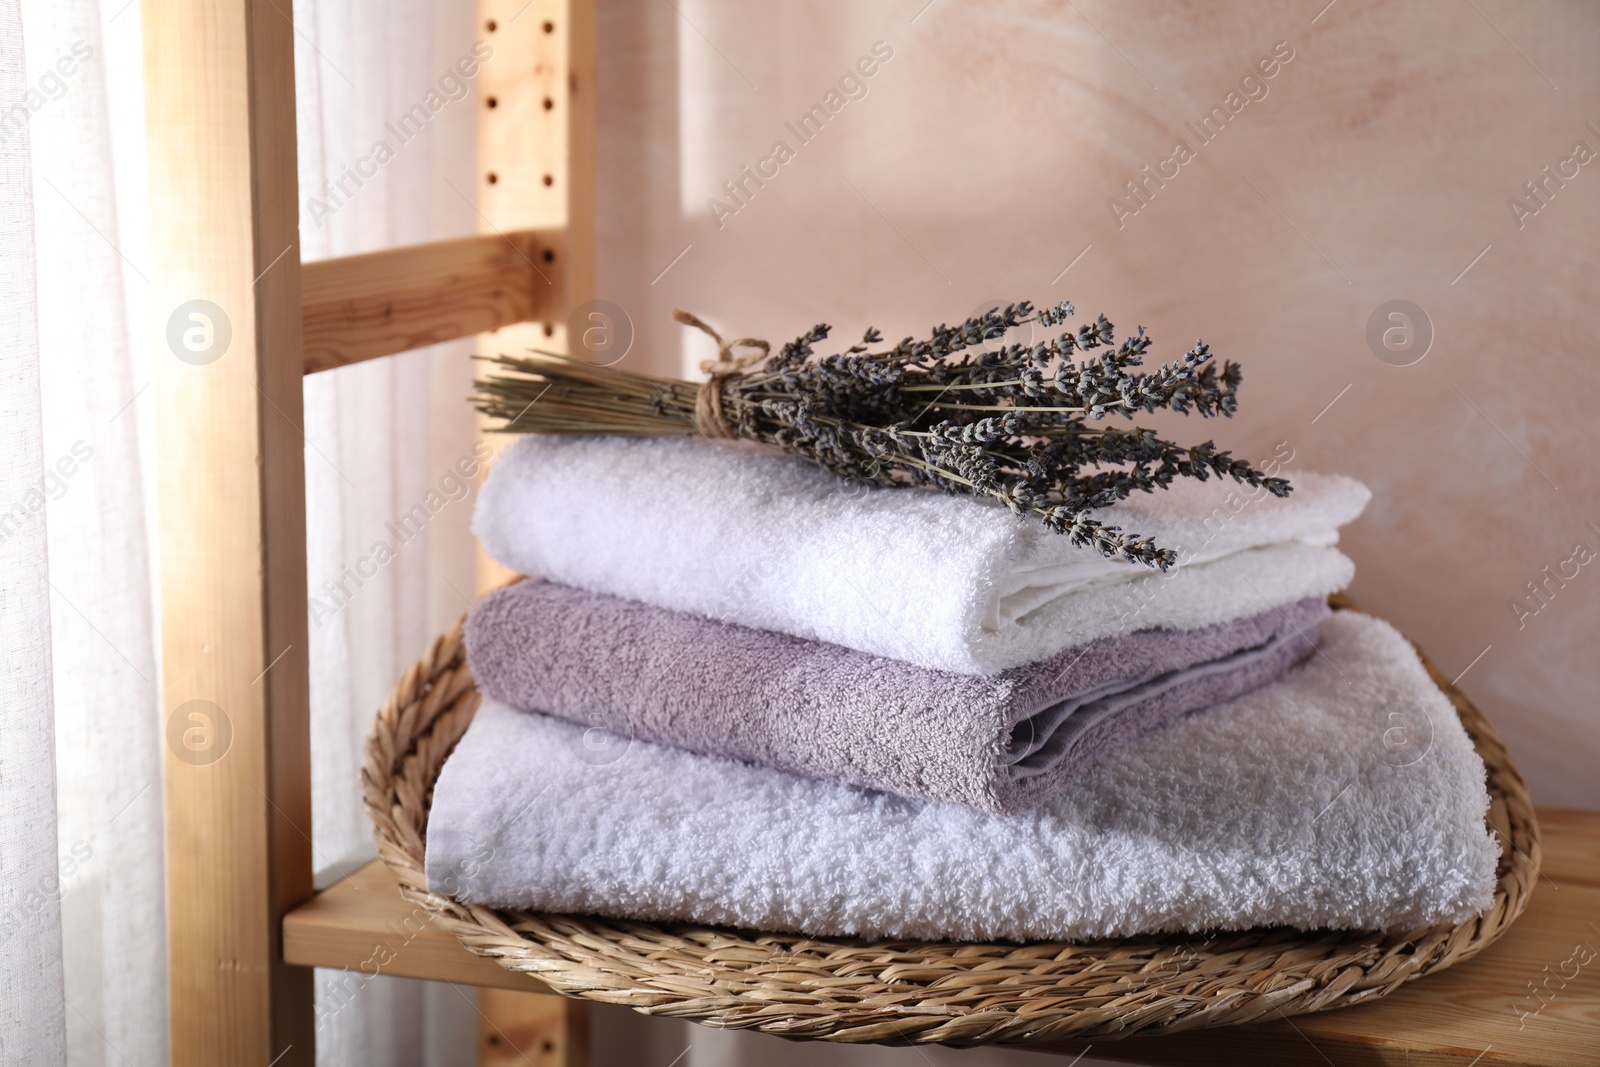 Photo of Stacked soft towels and lavender on wooden shelf indoors